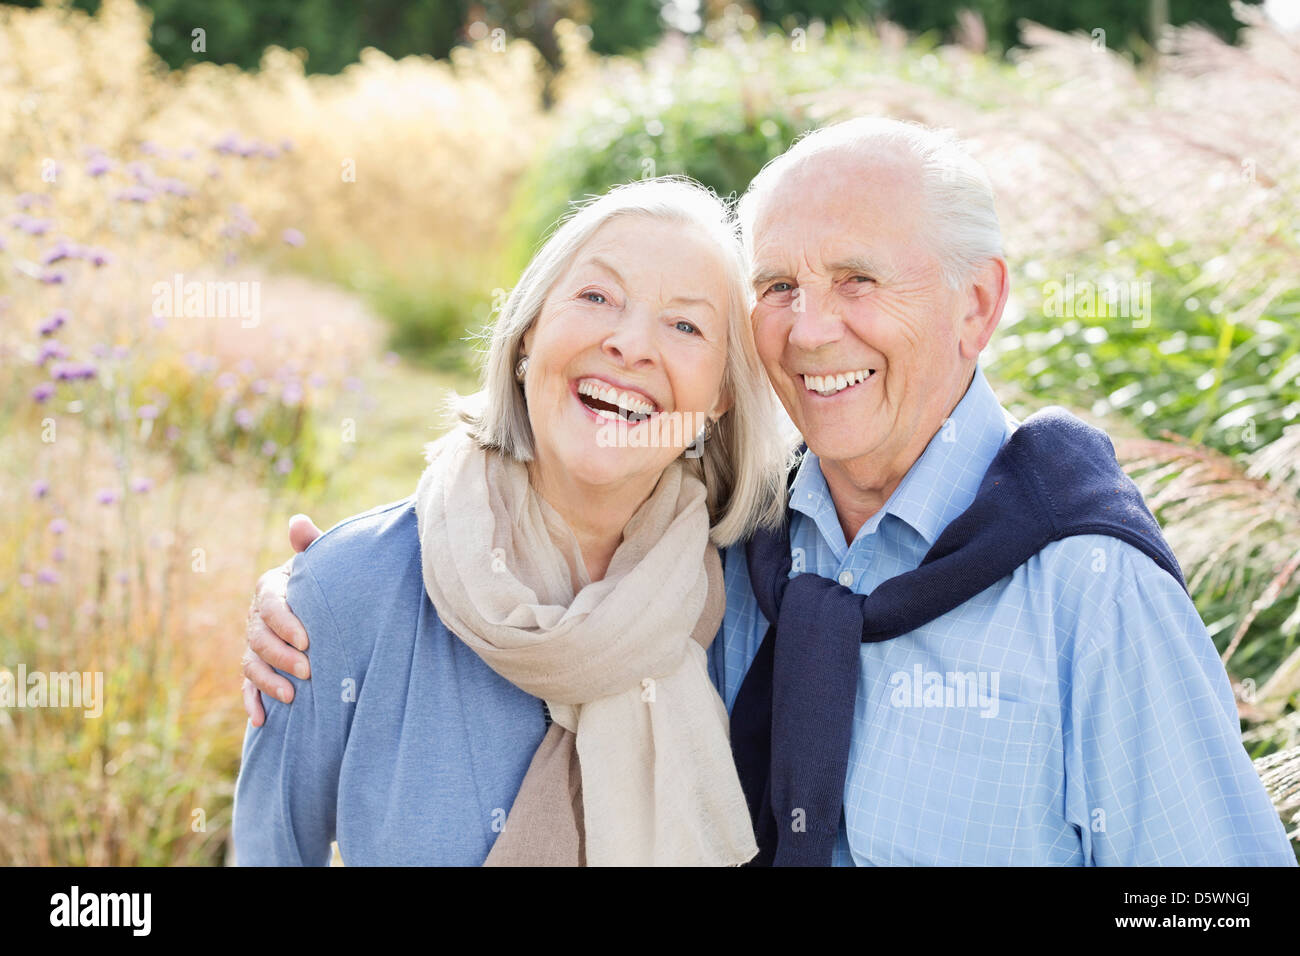 Older couple hugging outdoors Stock Photo